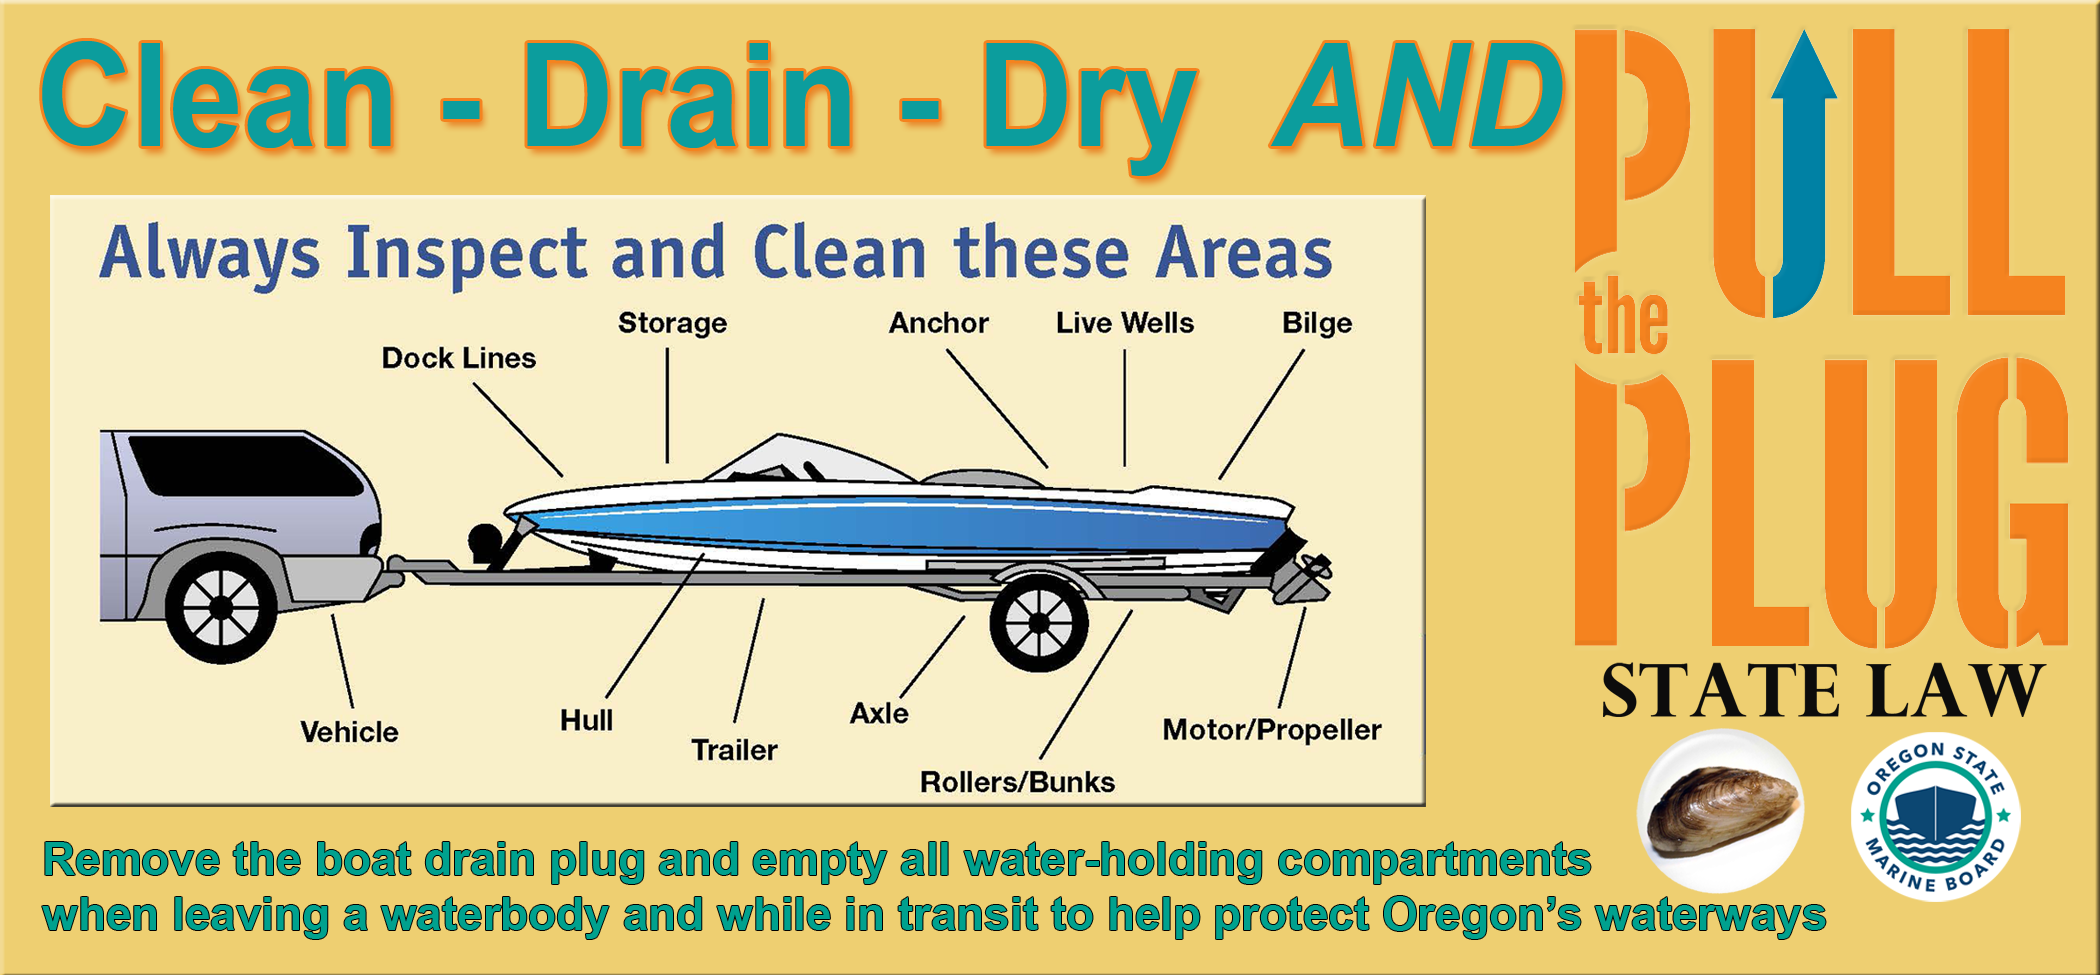 Clean Drain Dry and Pull the Plug graphic of where to inspect and areas to clean on a boat